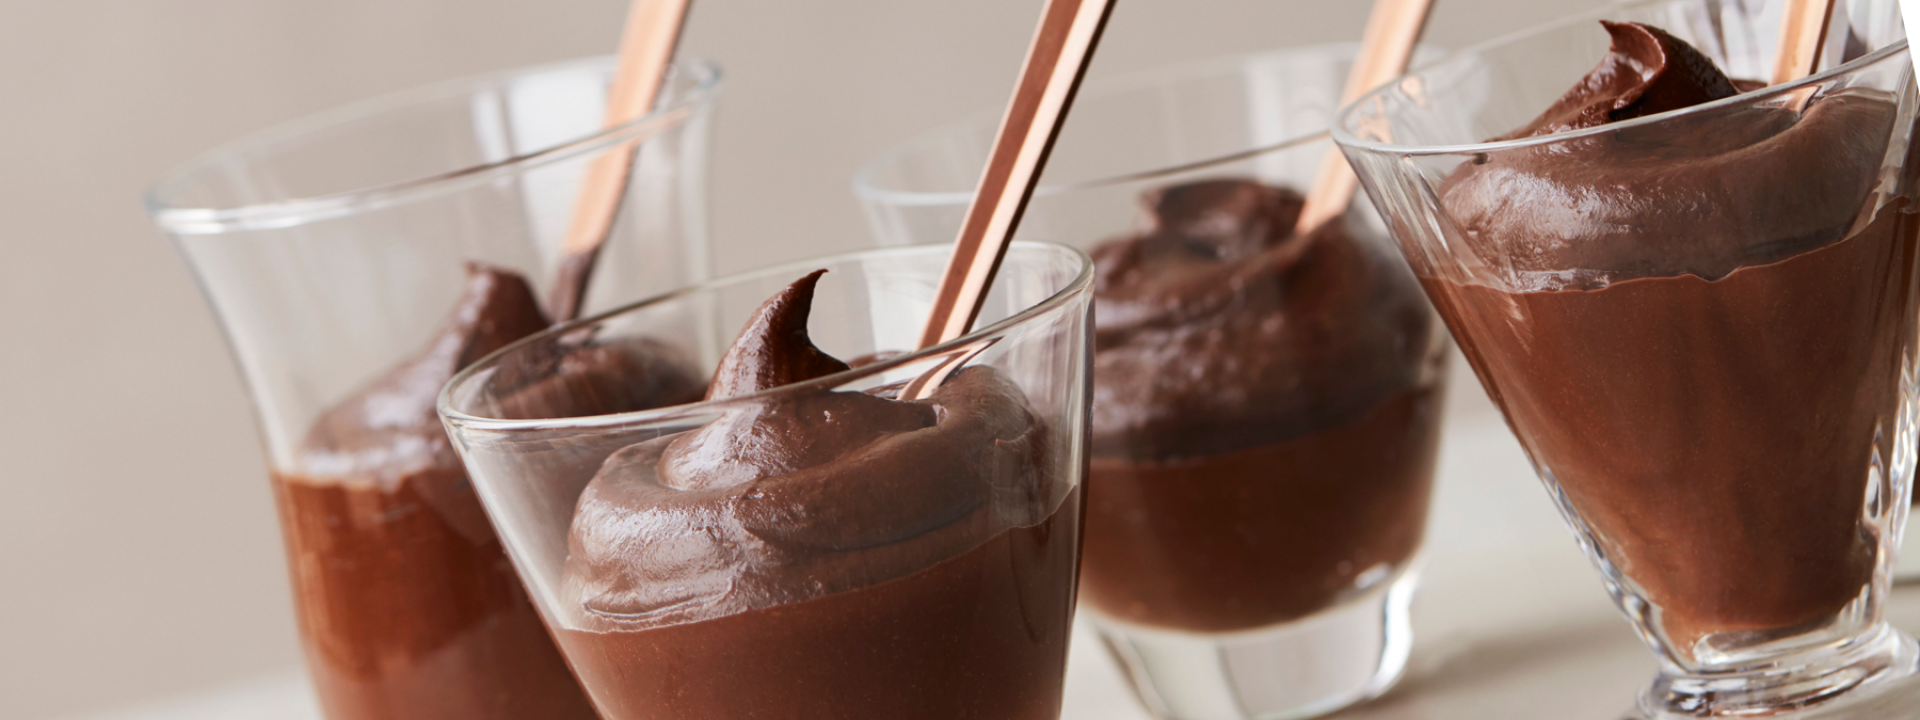 Chocolate and avocado mousse